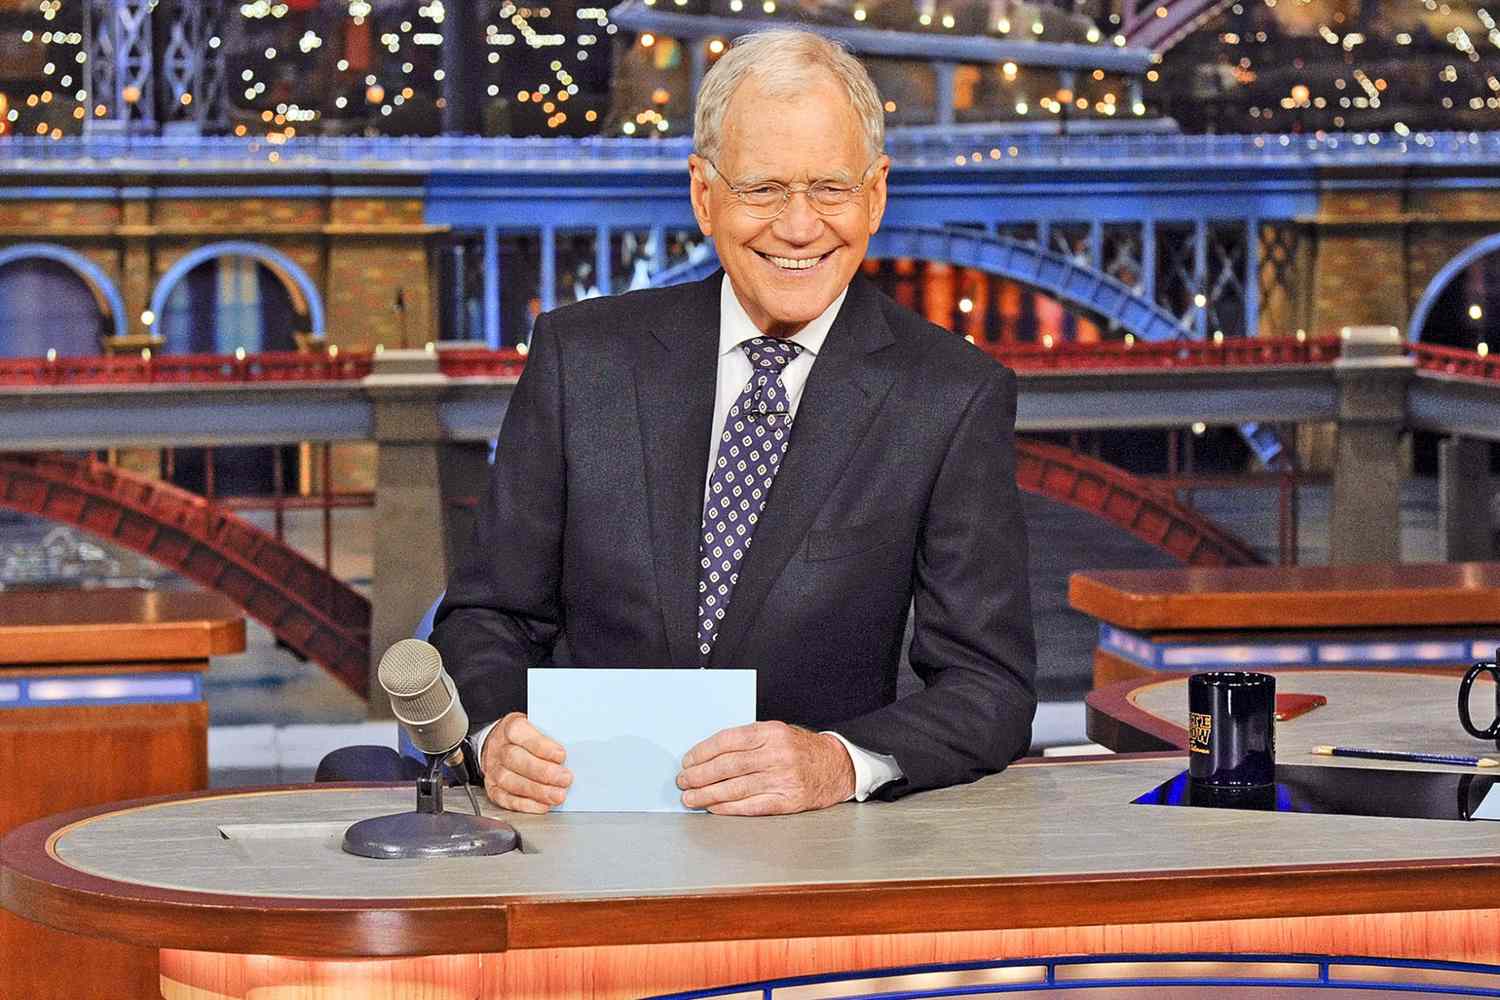 David Letterman is one of the world's richest TV hosts